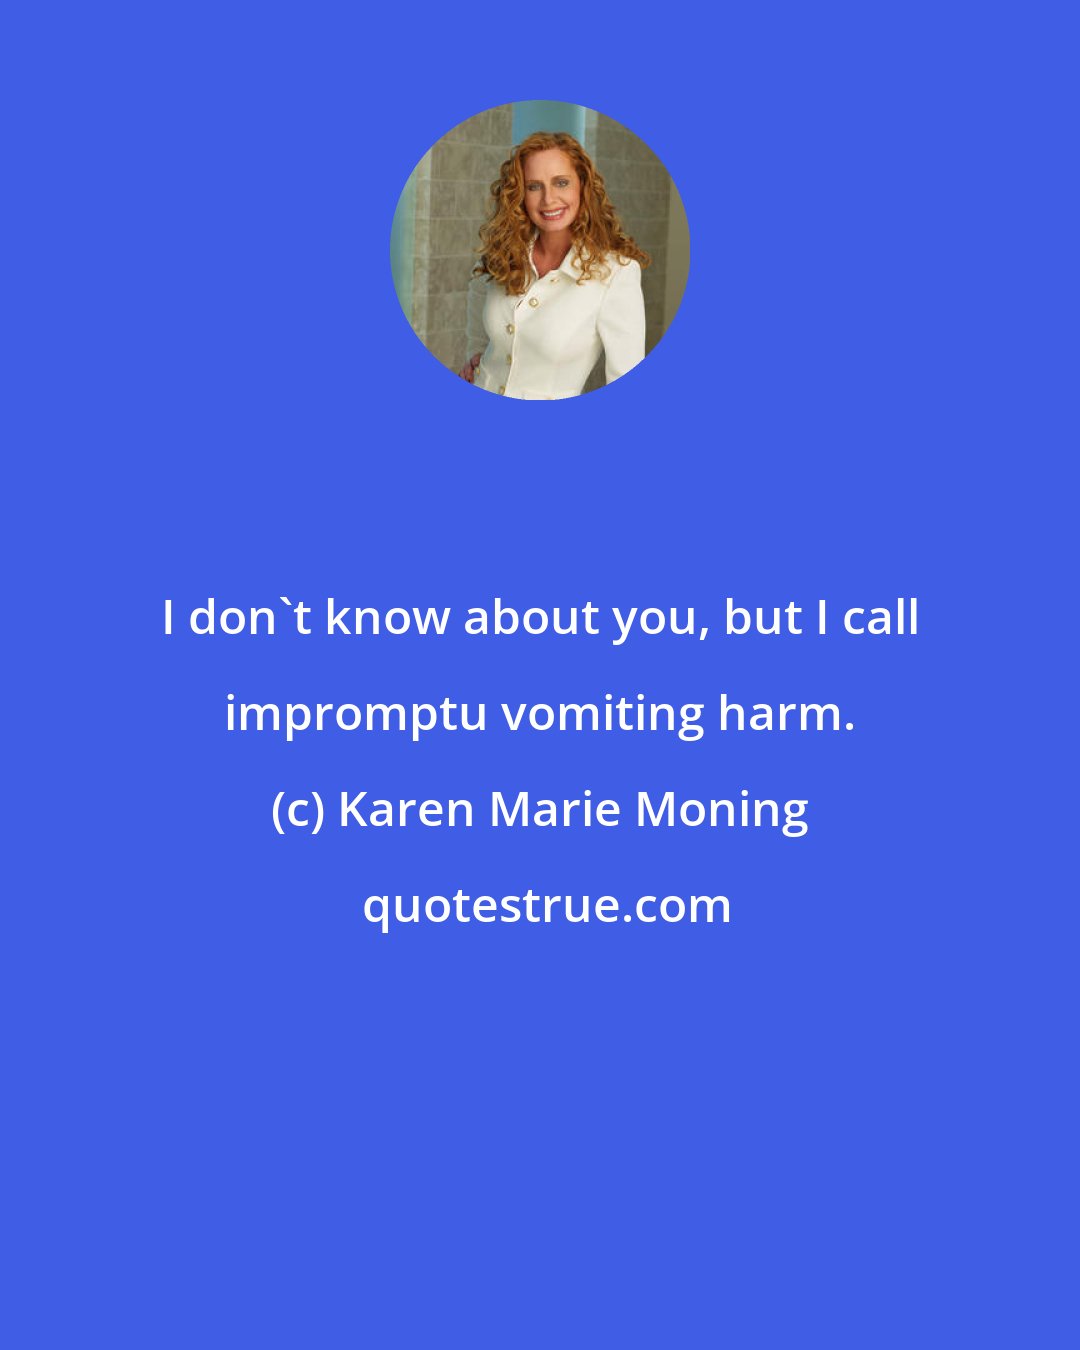 Karen Marie Moning: I don't know about you, but I call impromptu vomiting harm.